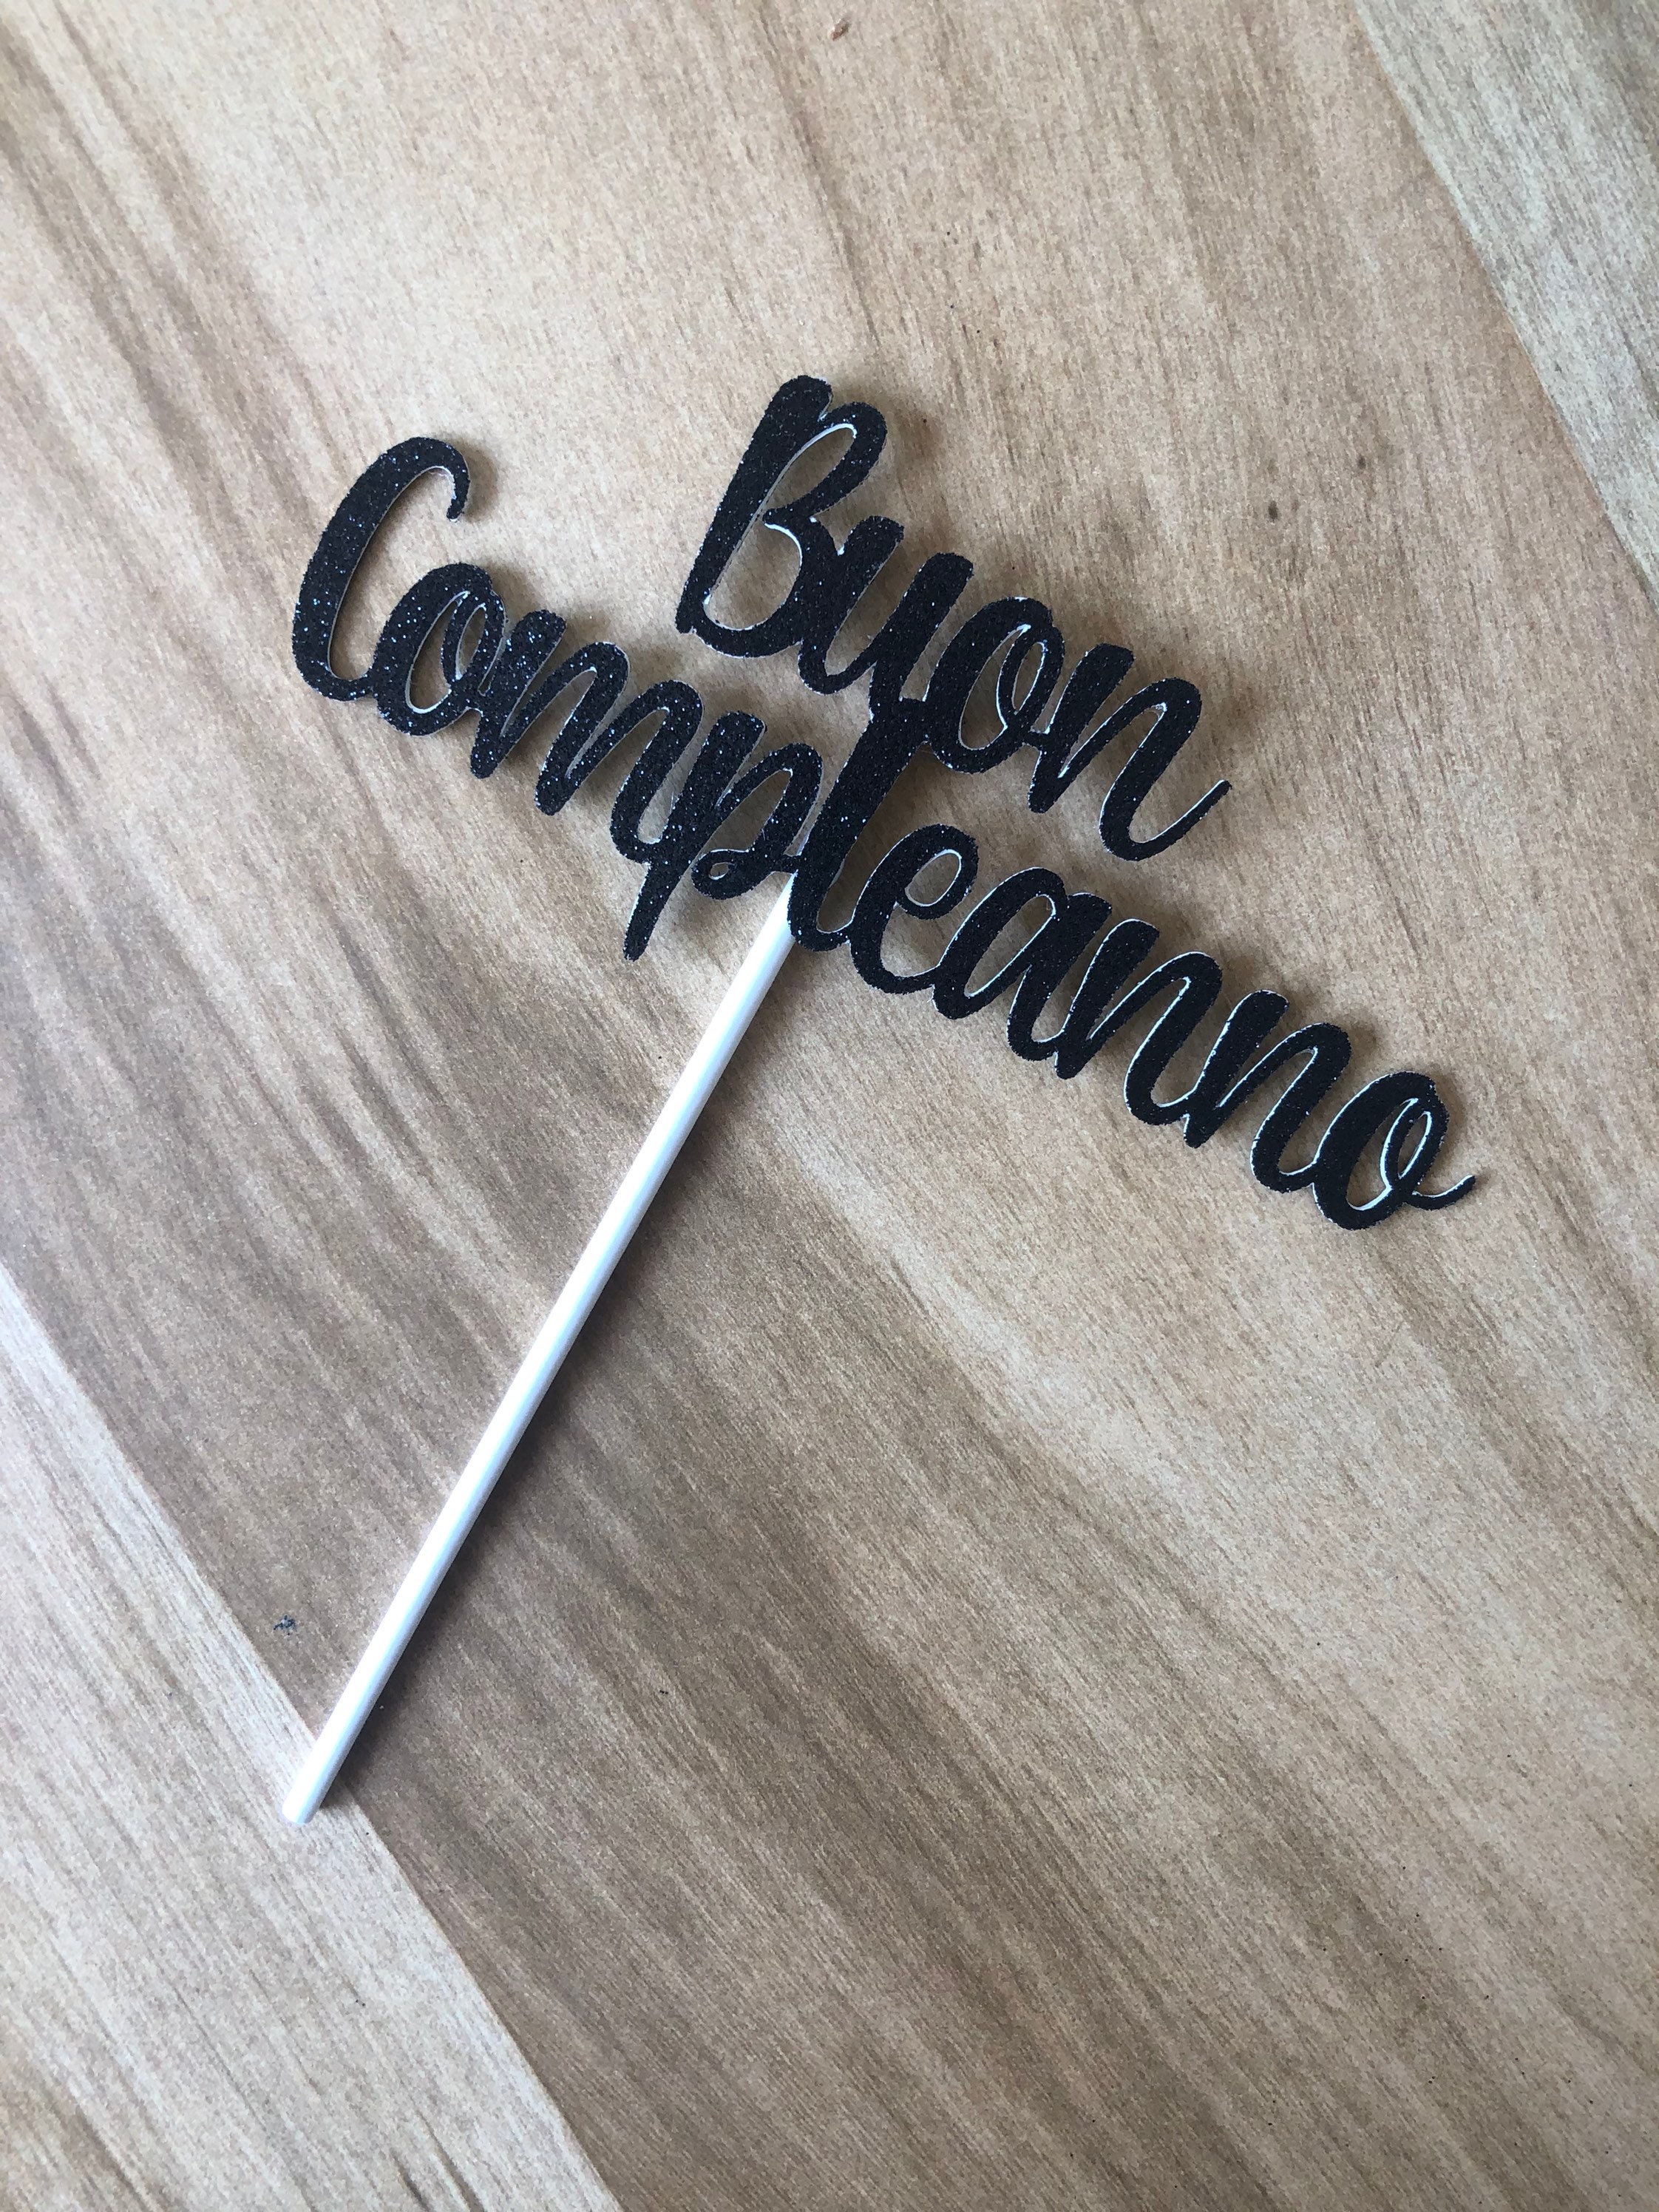  INNORU Buon Compleanno Cake Topper, Happy Birthday Cake Topper,  Italian Theme Birthday Party Decorations Supplies, Navy Blue Glitter :  Grocery & Gourmet Food